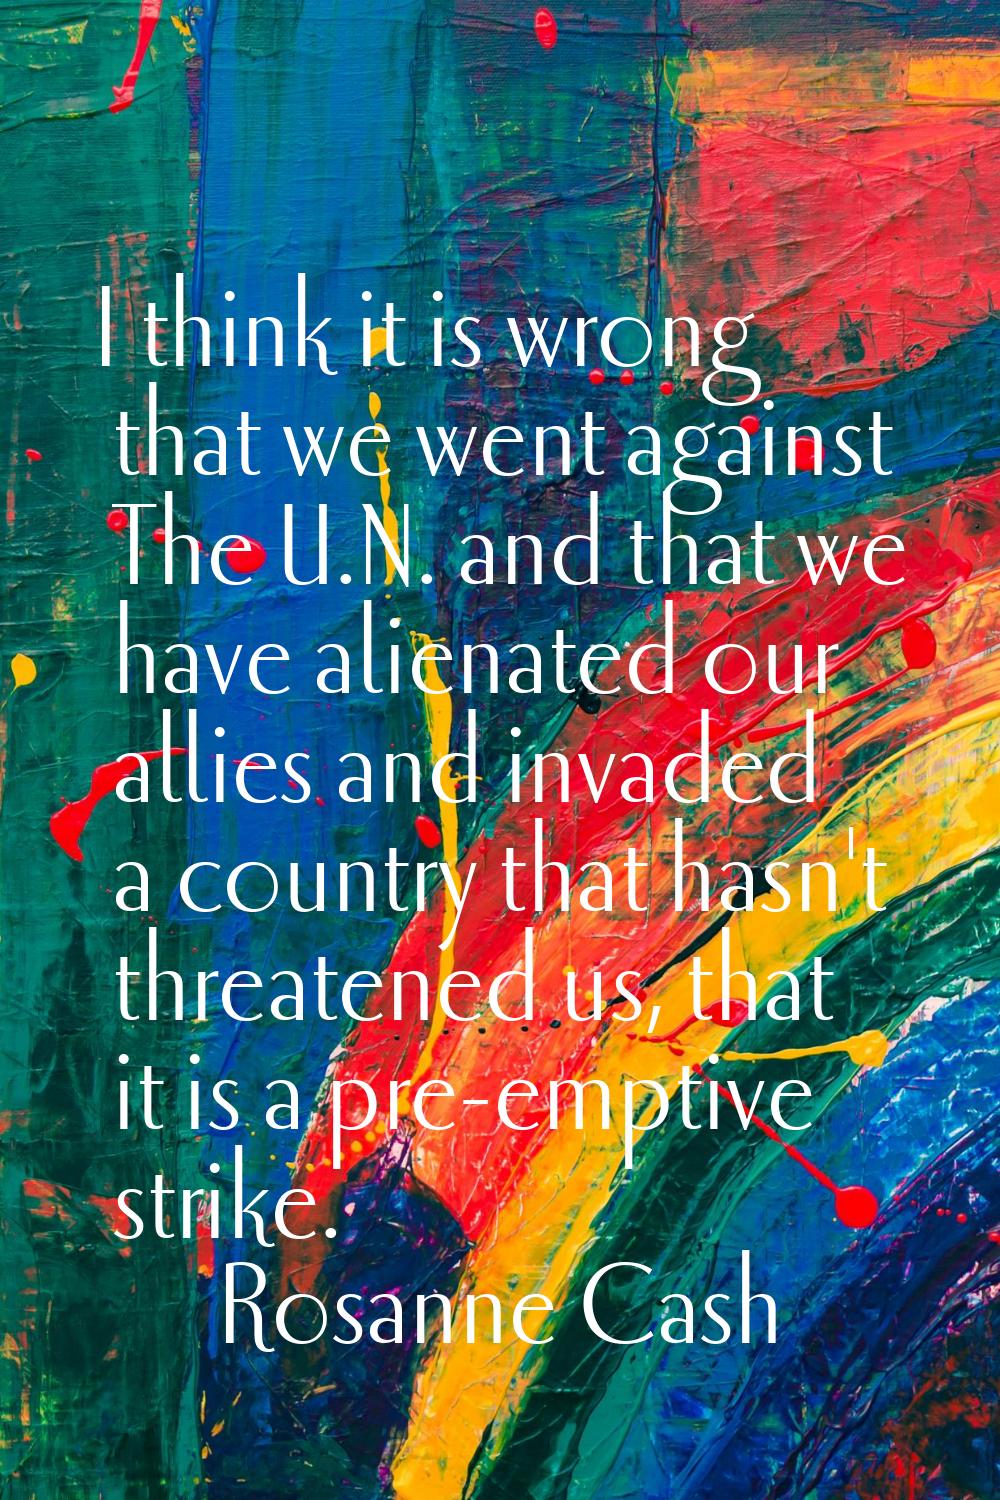 I think it is wrong that we went against The U.N. and that we have alienated our allies and invaded